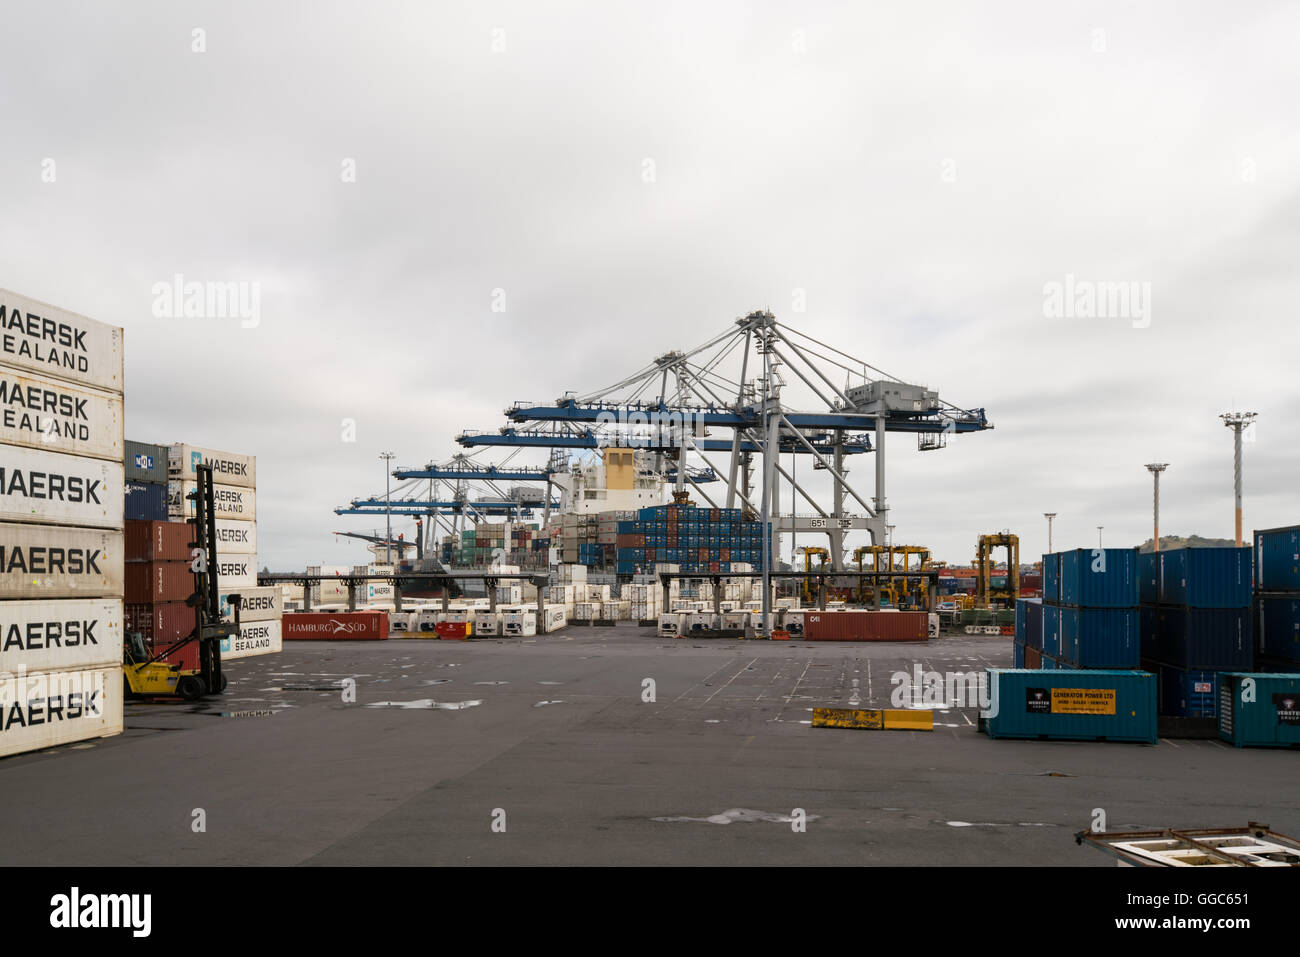 AUCKLAND, NZL -JAN 13 2016:Big cargo ship unloading containers in Ports of Auckland New Zealand. New Zealand's busiest port and Stock Photo